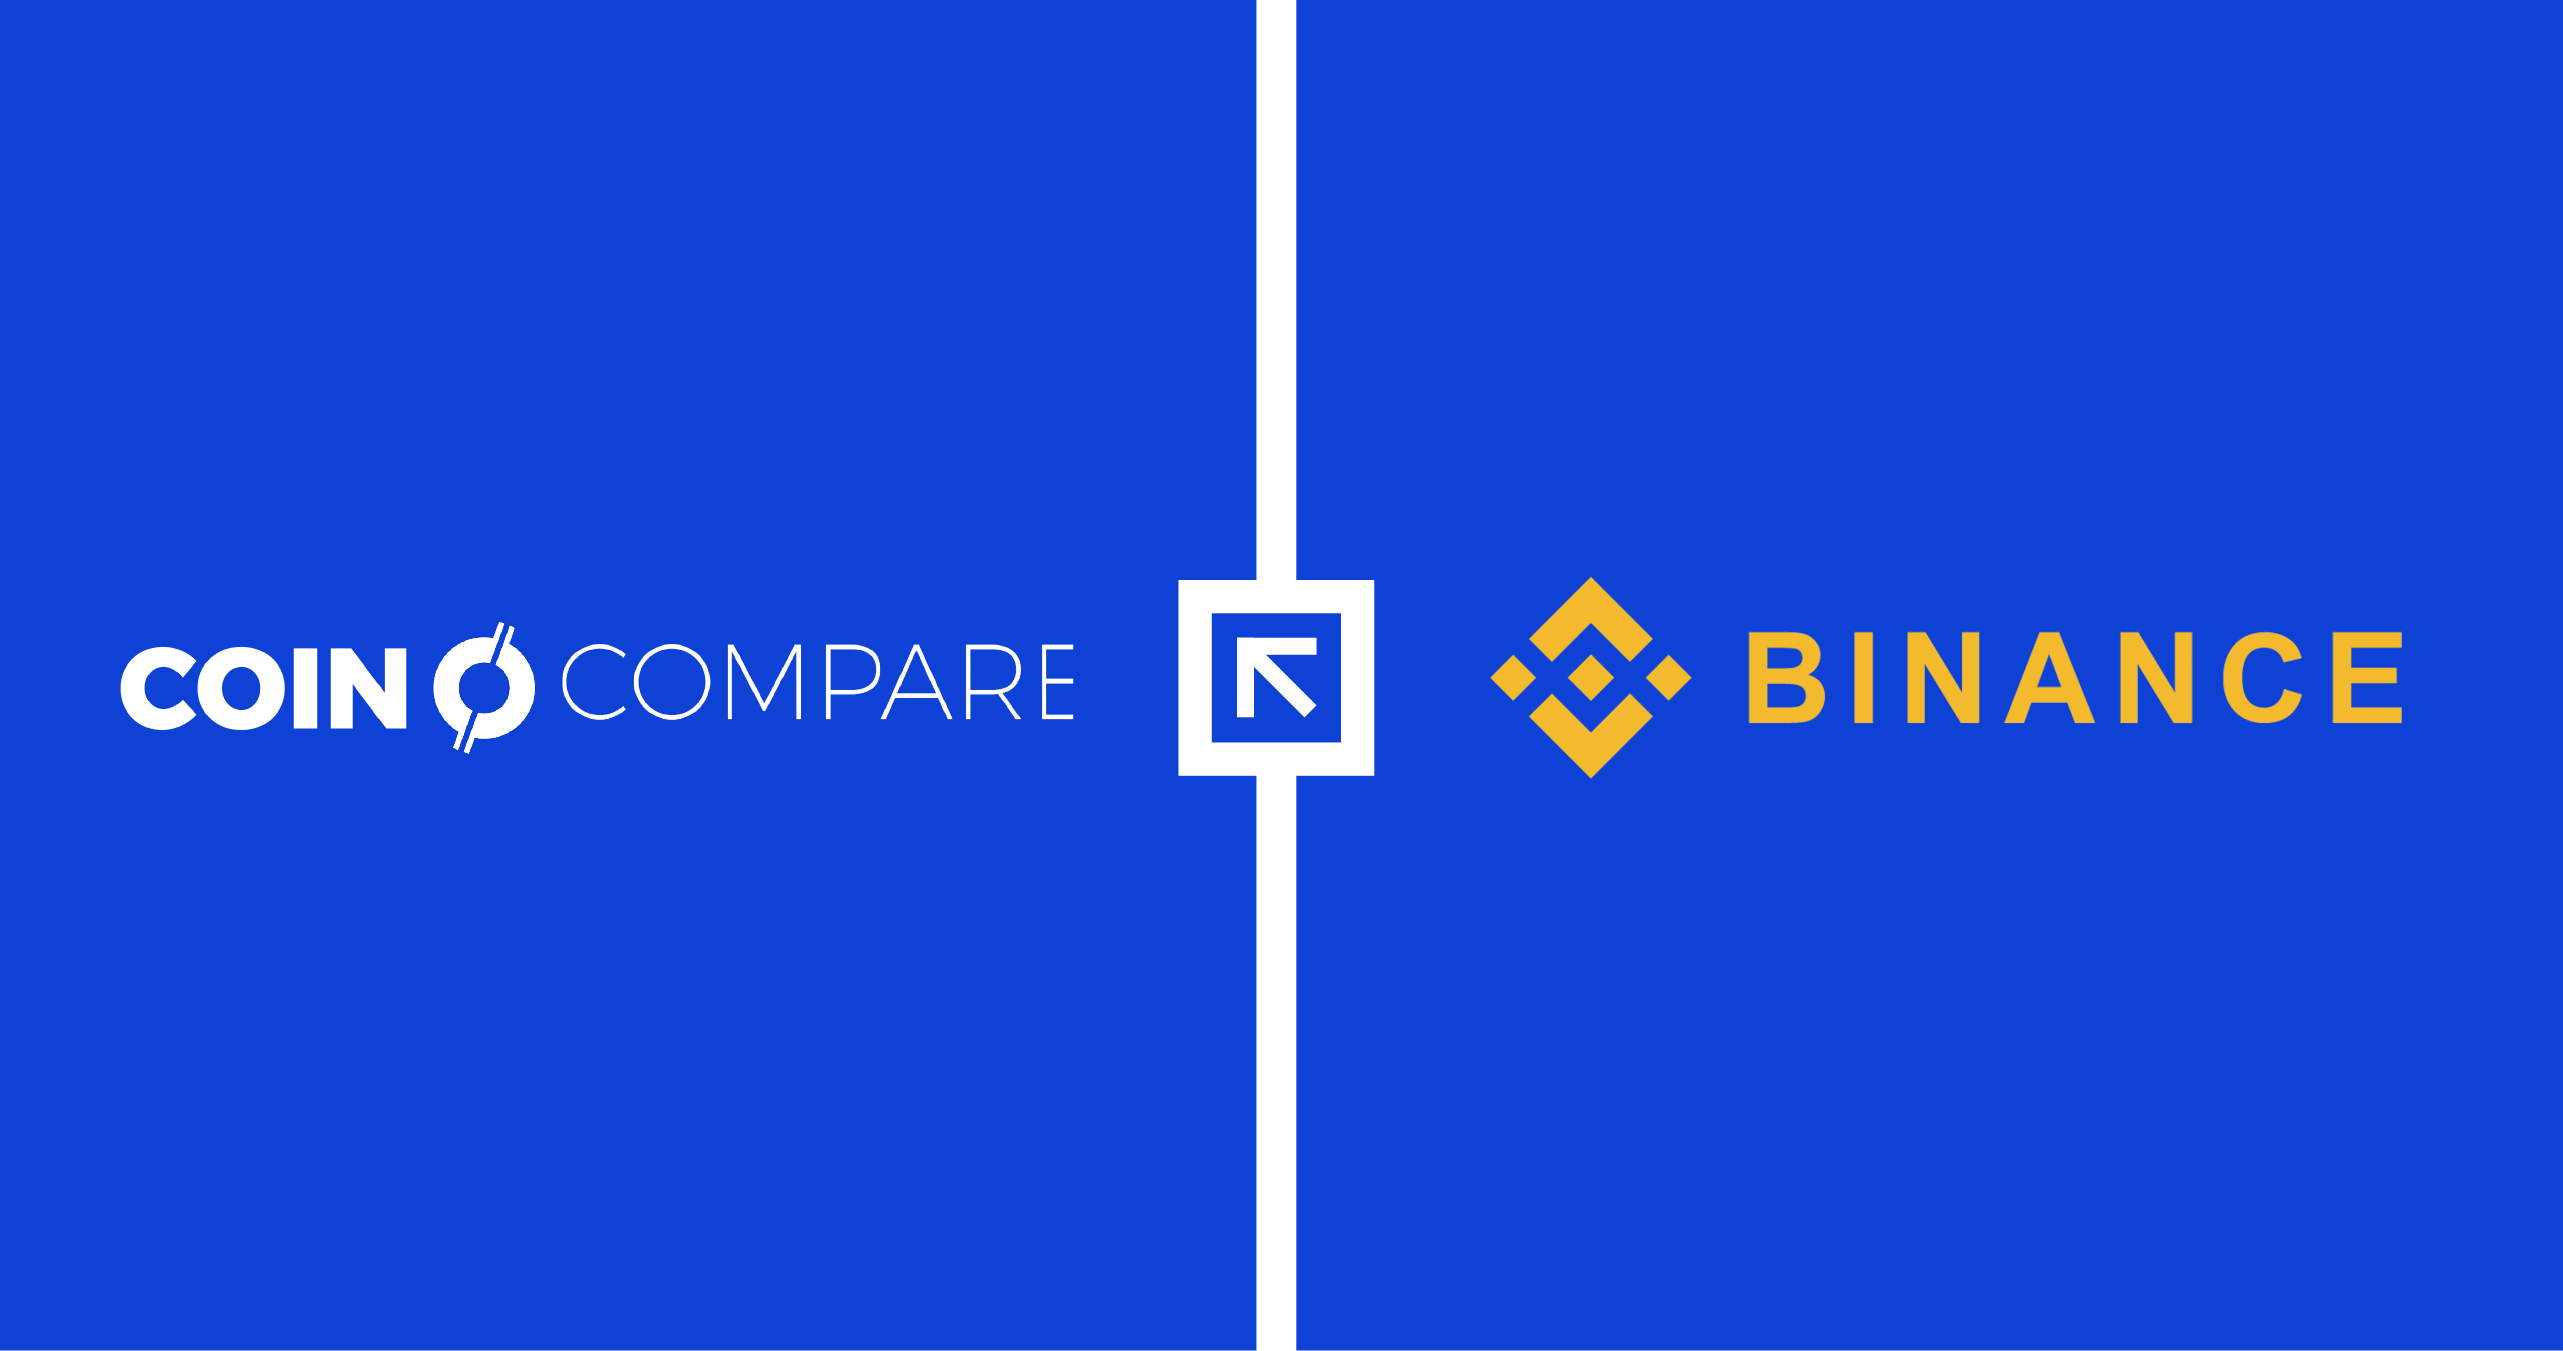 Binance review, our experience and rating | CoinCompare